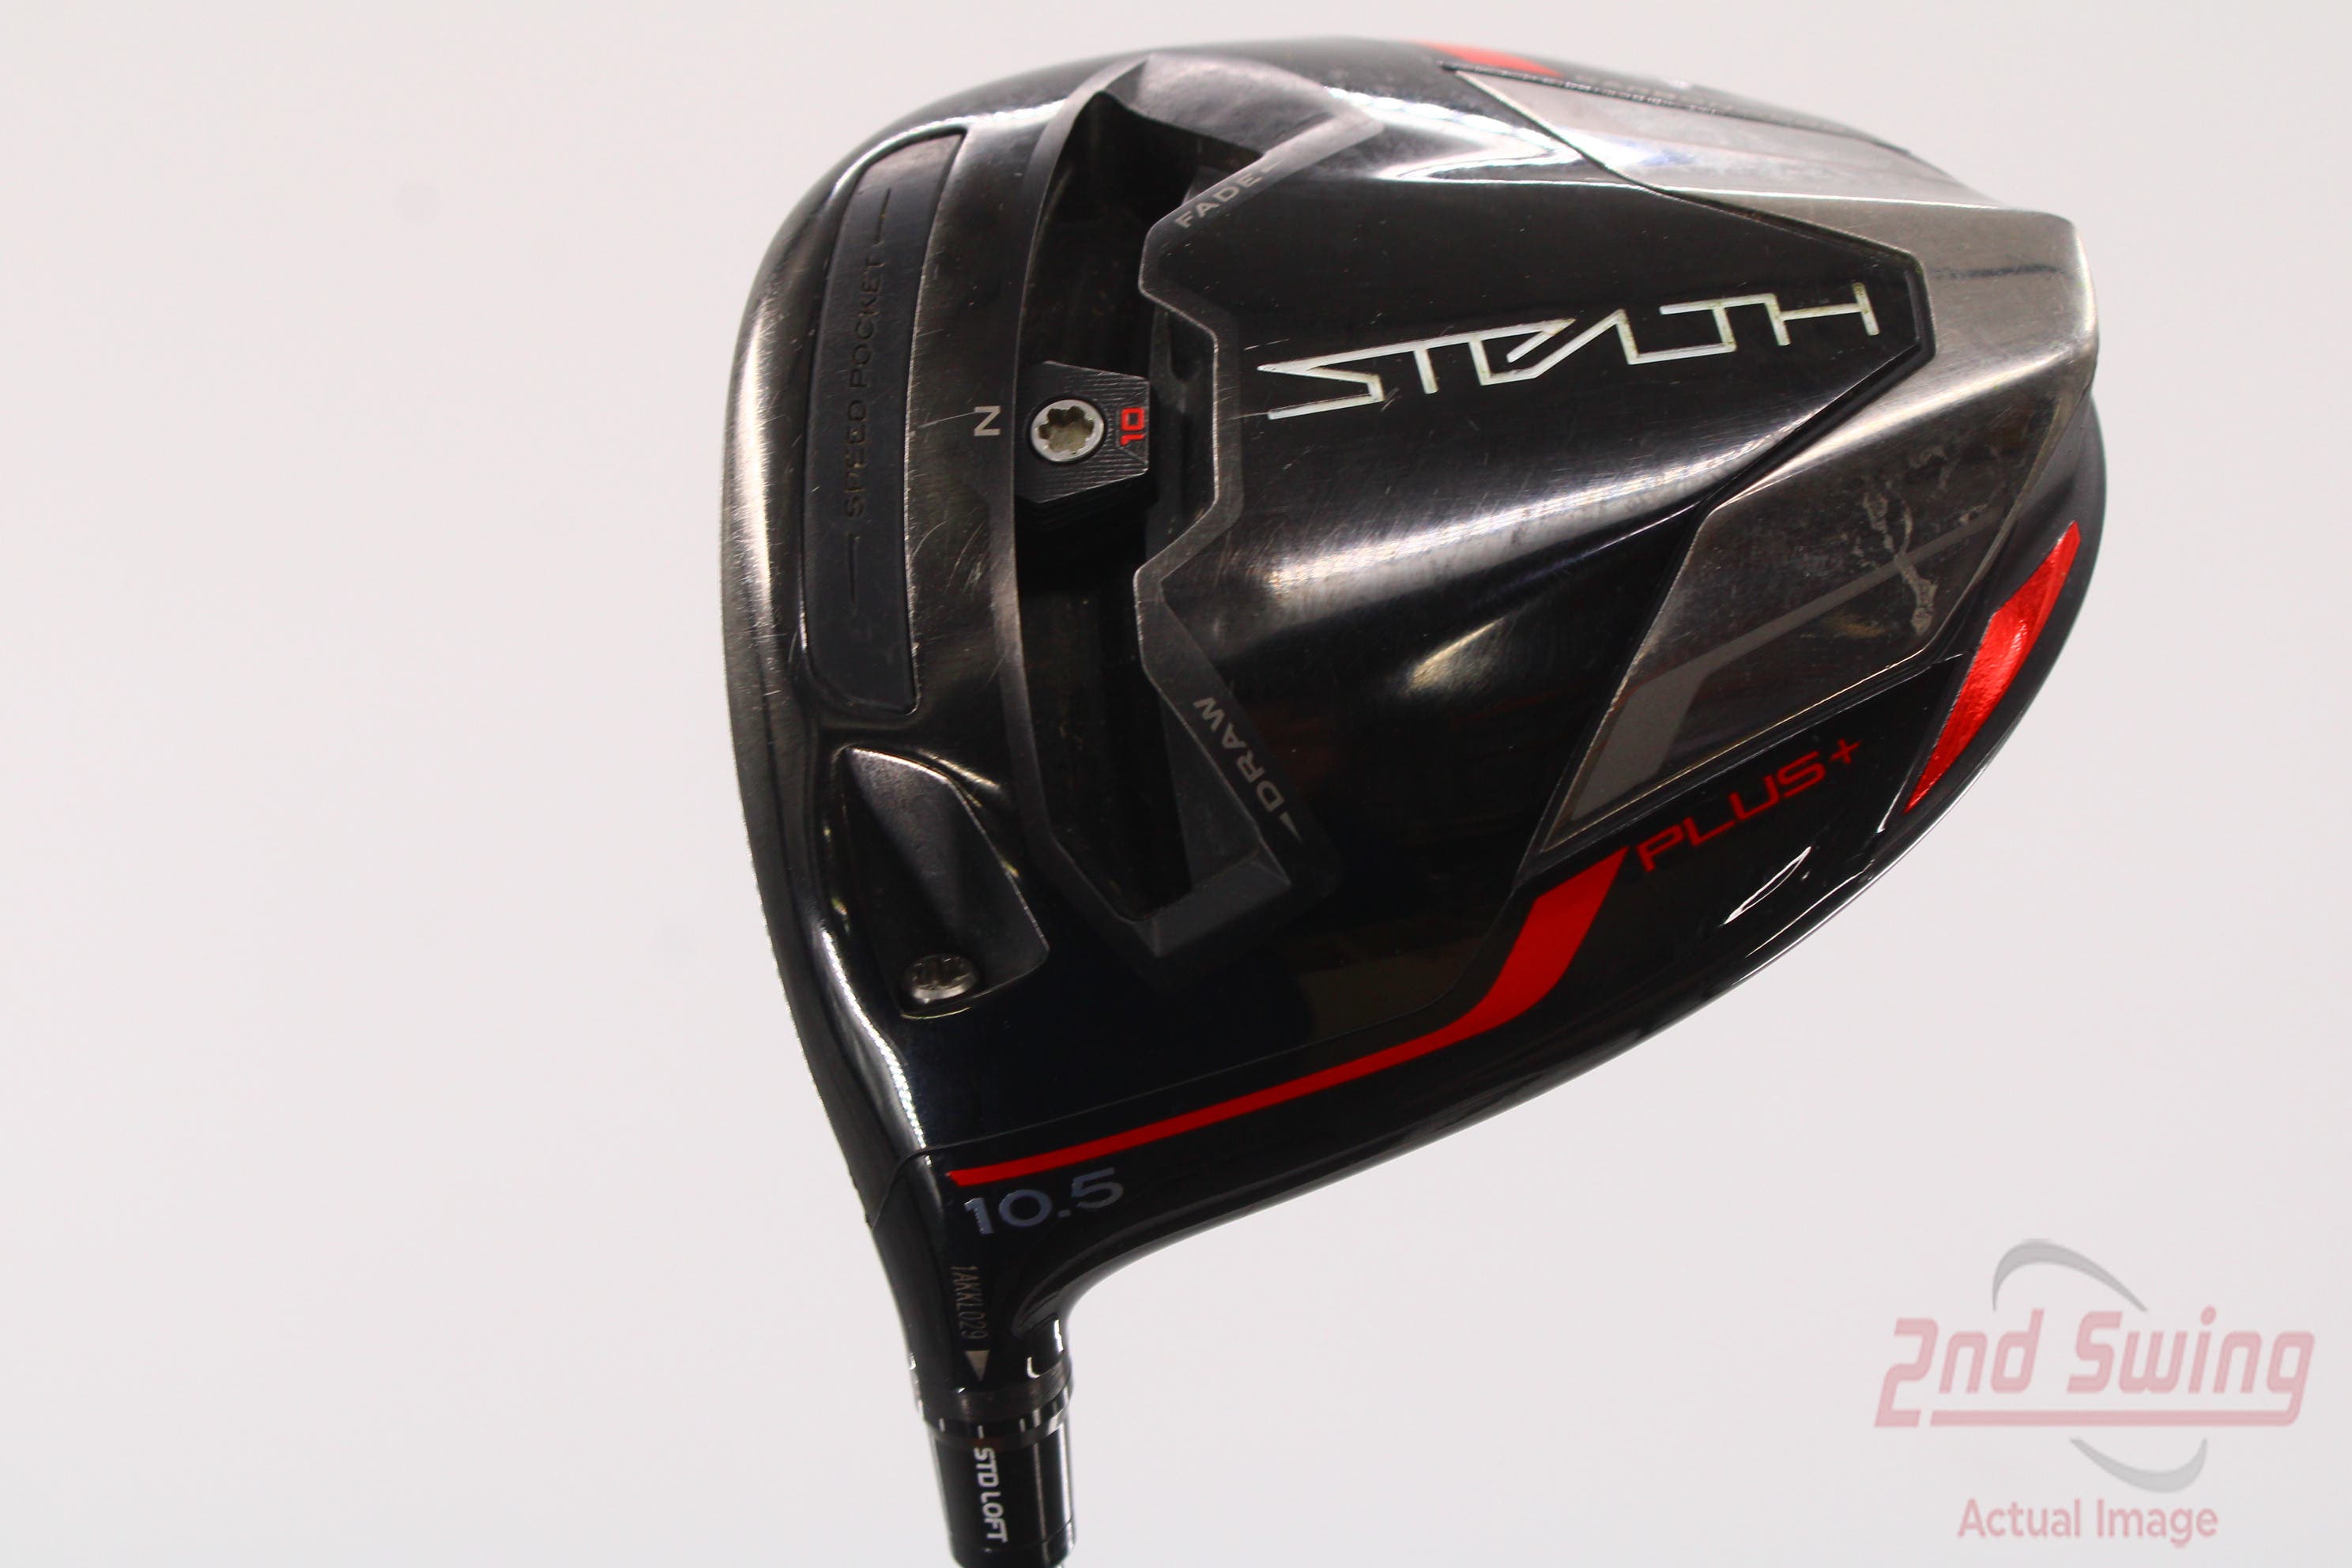 Used TaylorMade STEALTH PLUS Driver Golf